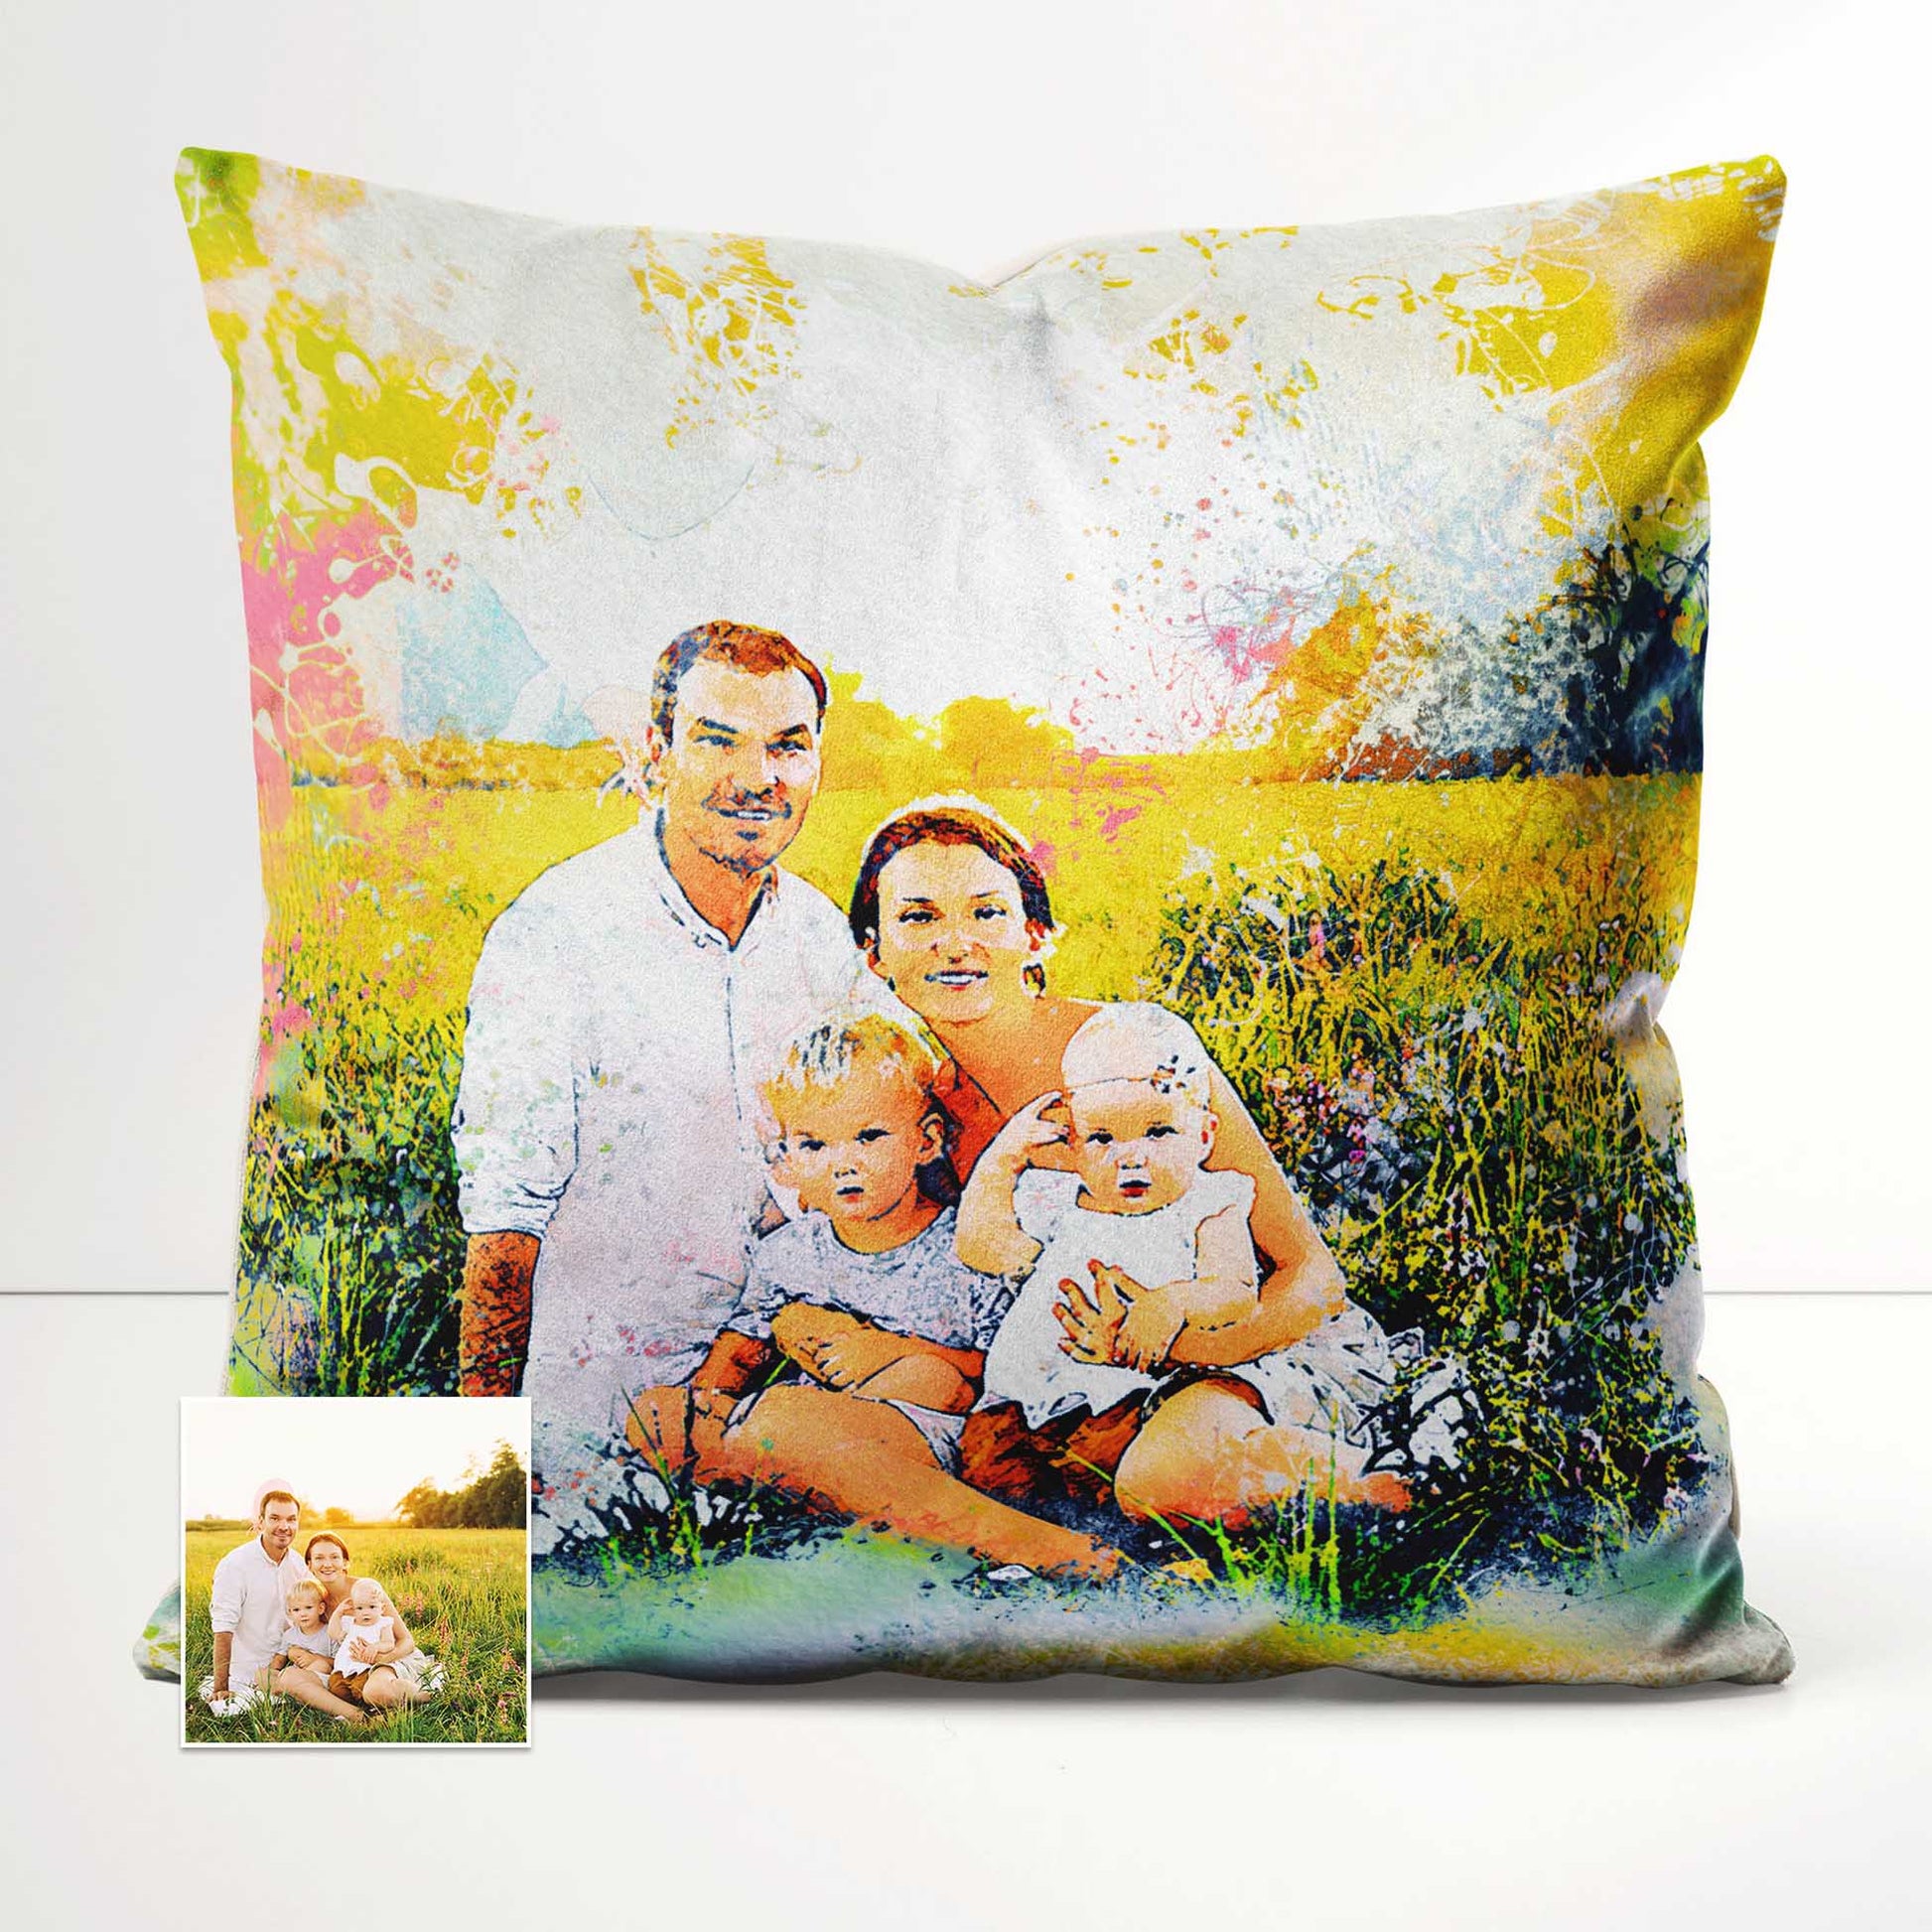 Experience the joy of a personalised Watercolor Splash Cushion, offering both comfort and fun. Its vibrant and lively design adds an exciting element to your home decor. Print your favorite photo on this cosy cushion and let your creativity